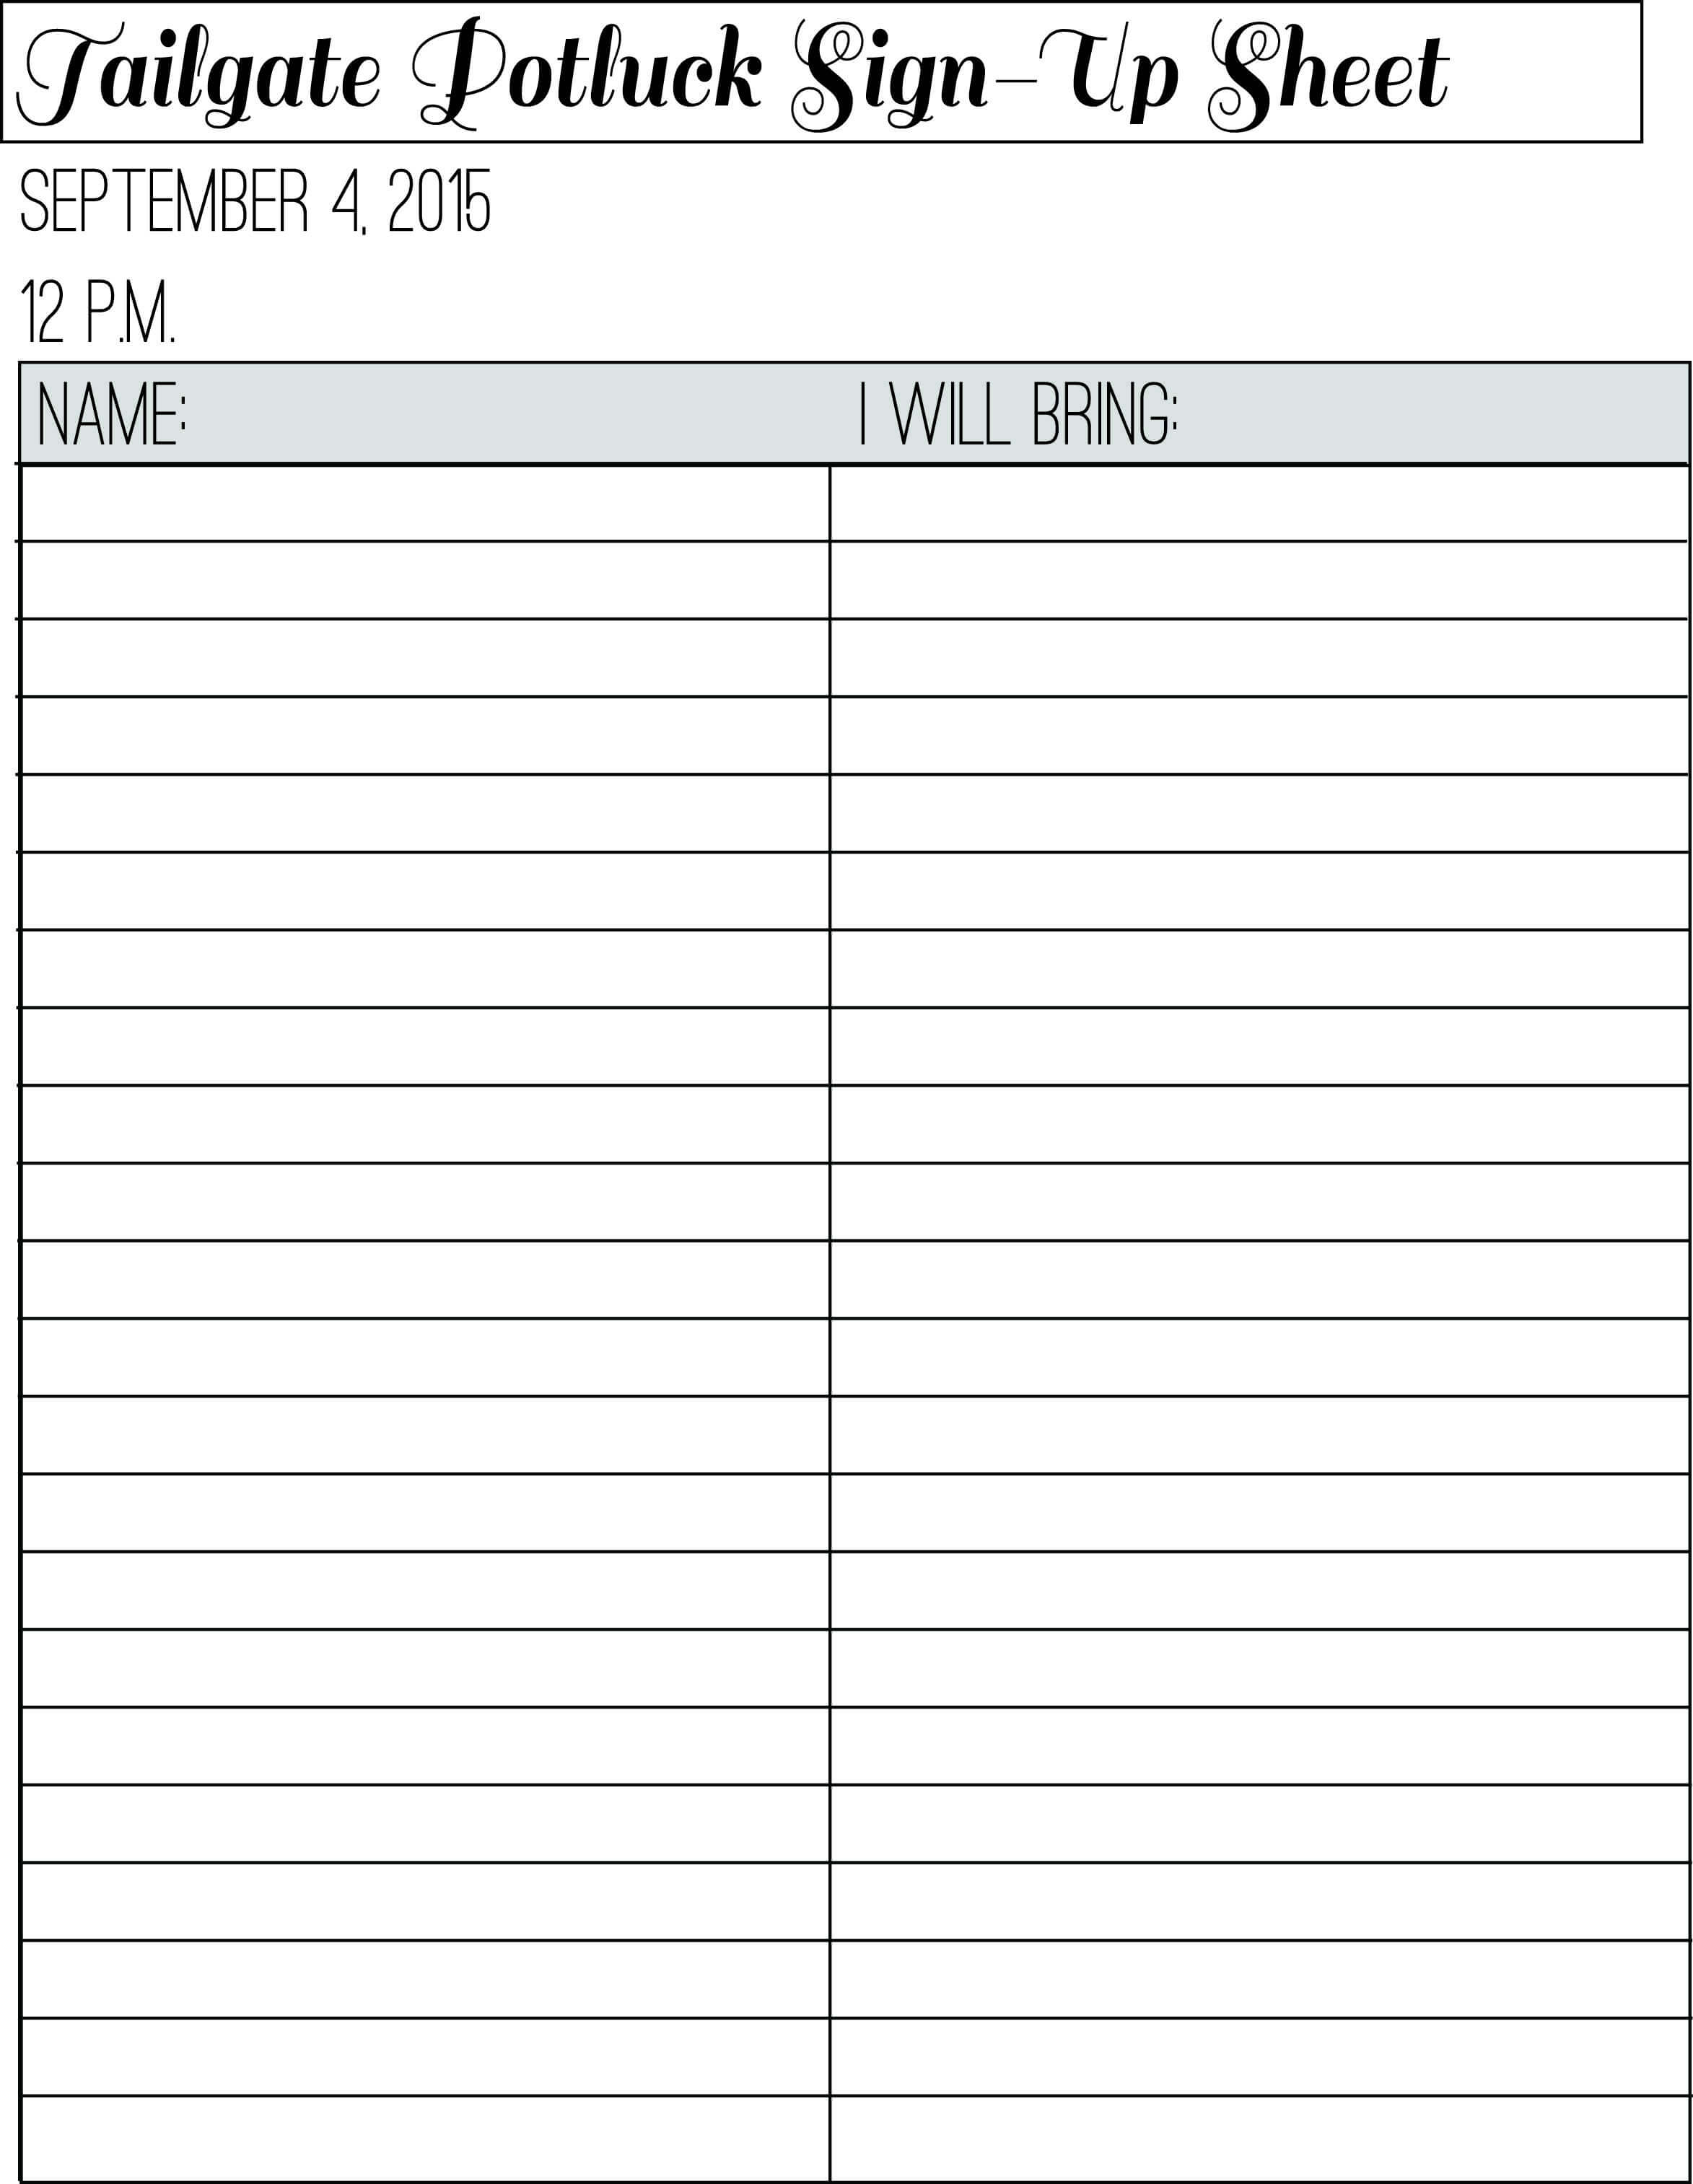 The Sign Up Sheet For Our Tailgate Potluck. In 2019 | Office For Potluck Signup Sheet Template Word